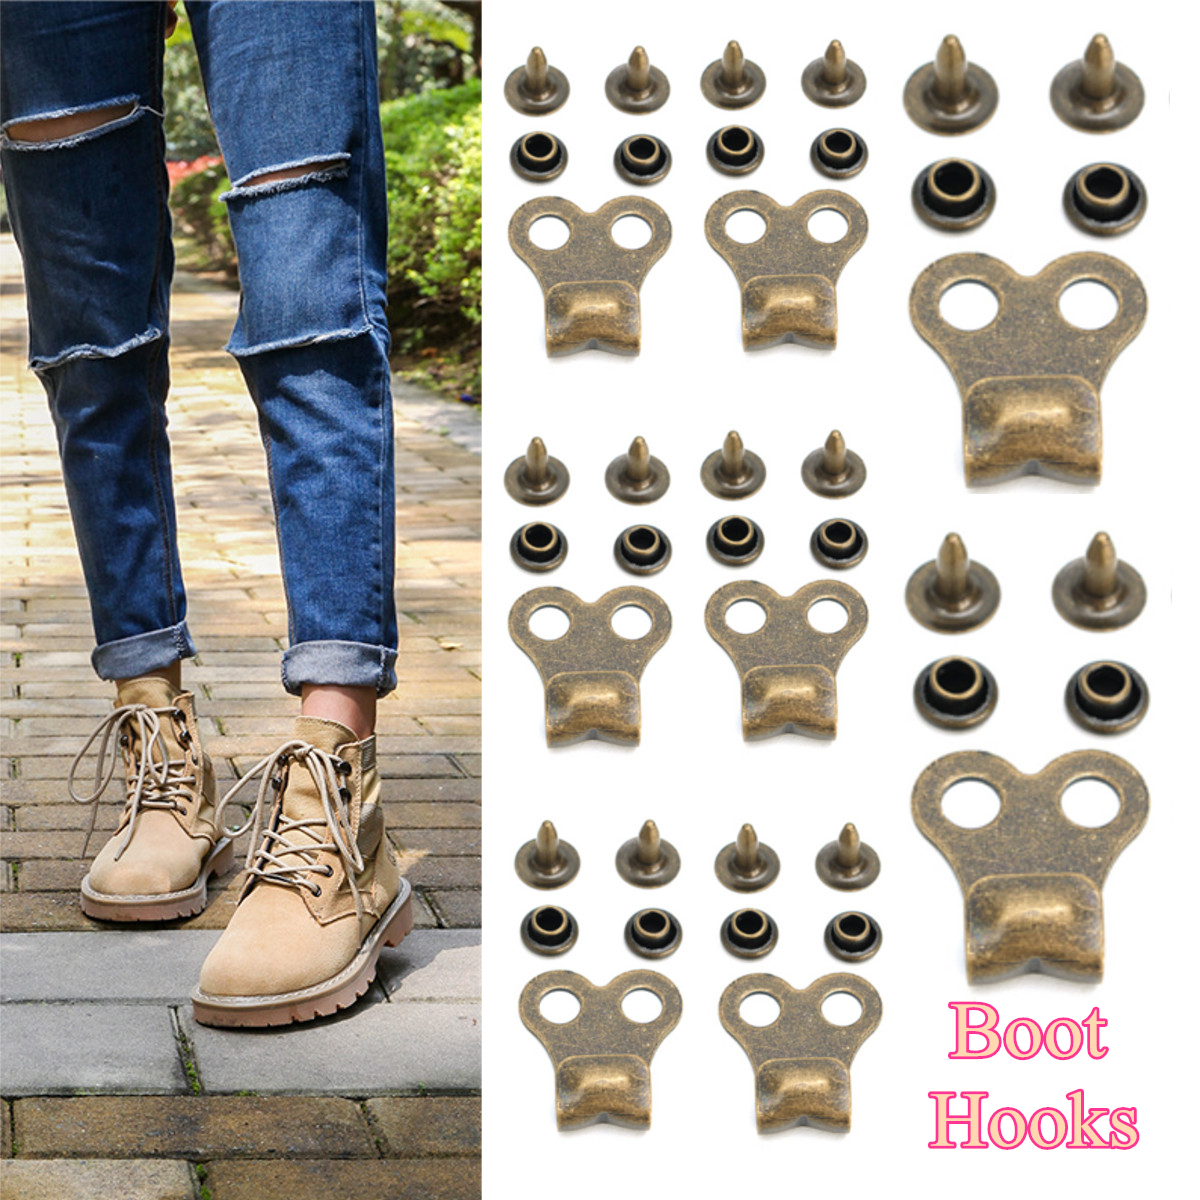 10-Set-Gunmetal-Boot-Hooks-Lace-Fittings-with-Rivets-for-Camping-Hiking-Climbing-1259095